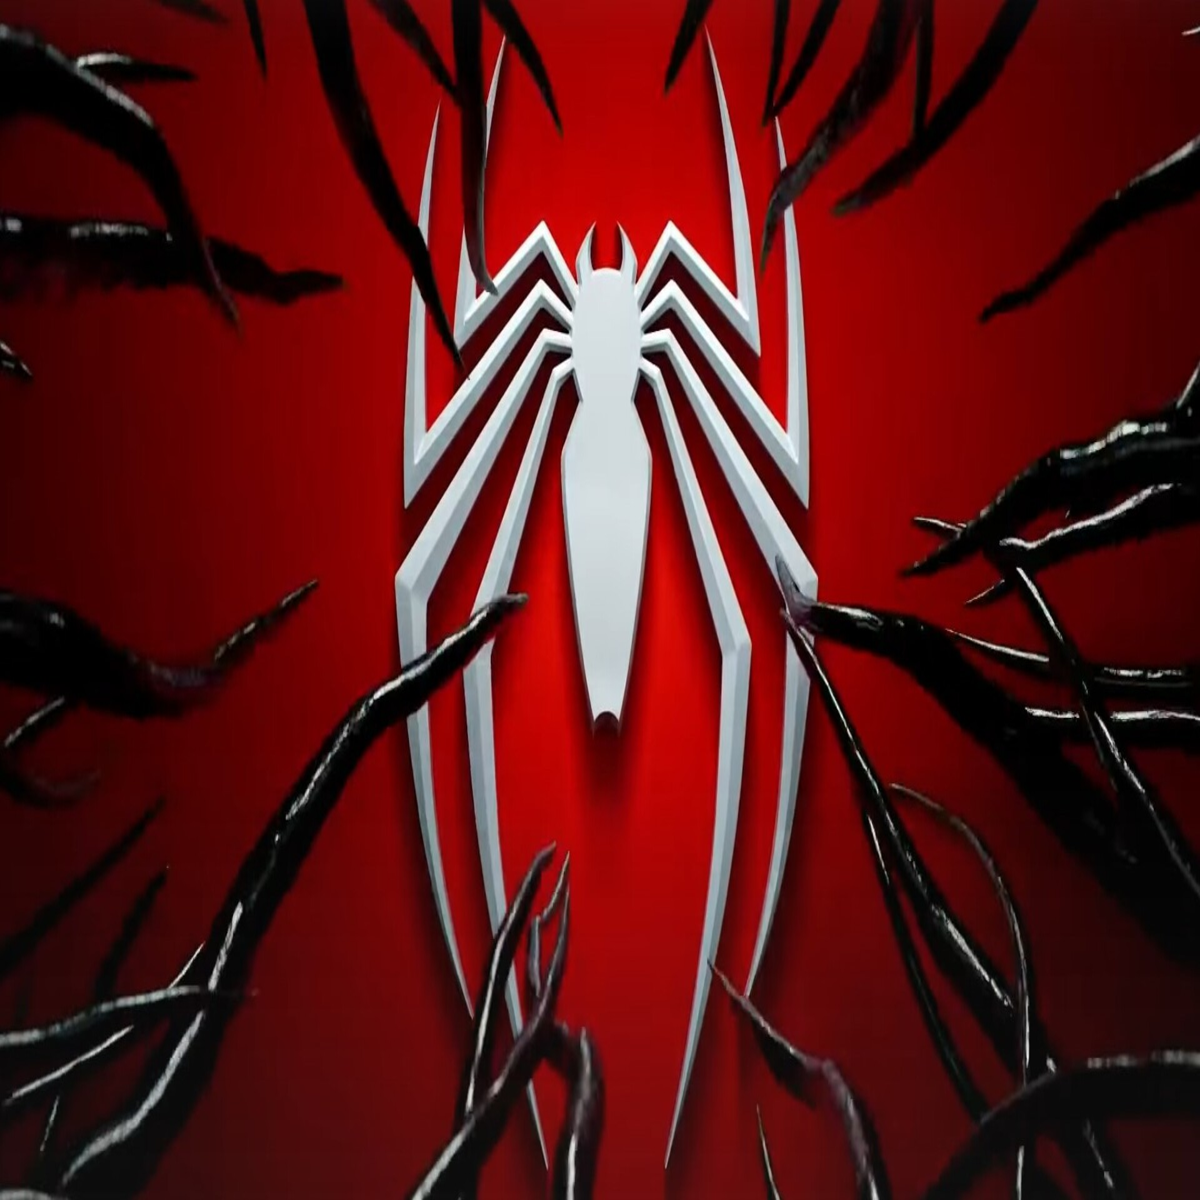 Marvel's Spider-Man 2: What Does The Teaser Mean?